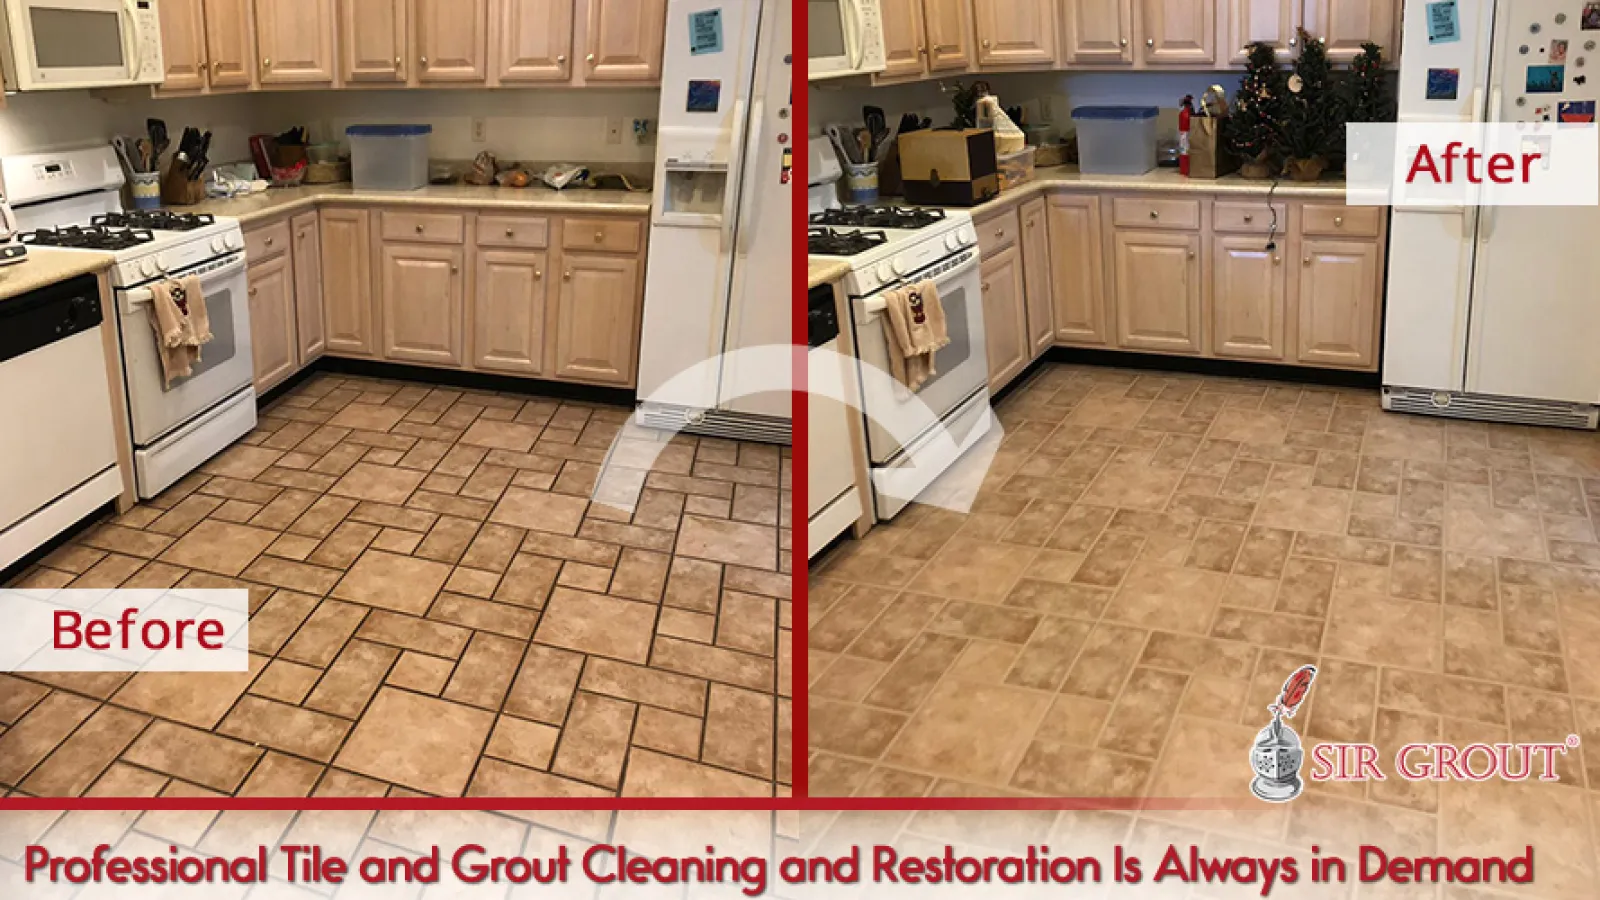 Tile and Grout Cleaning Franchise: A Great Business Opportunity